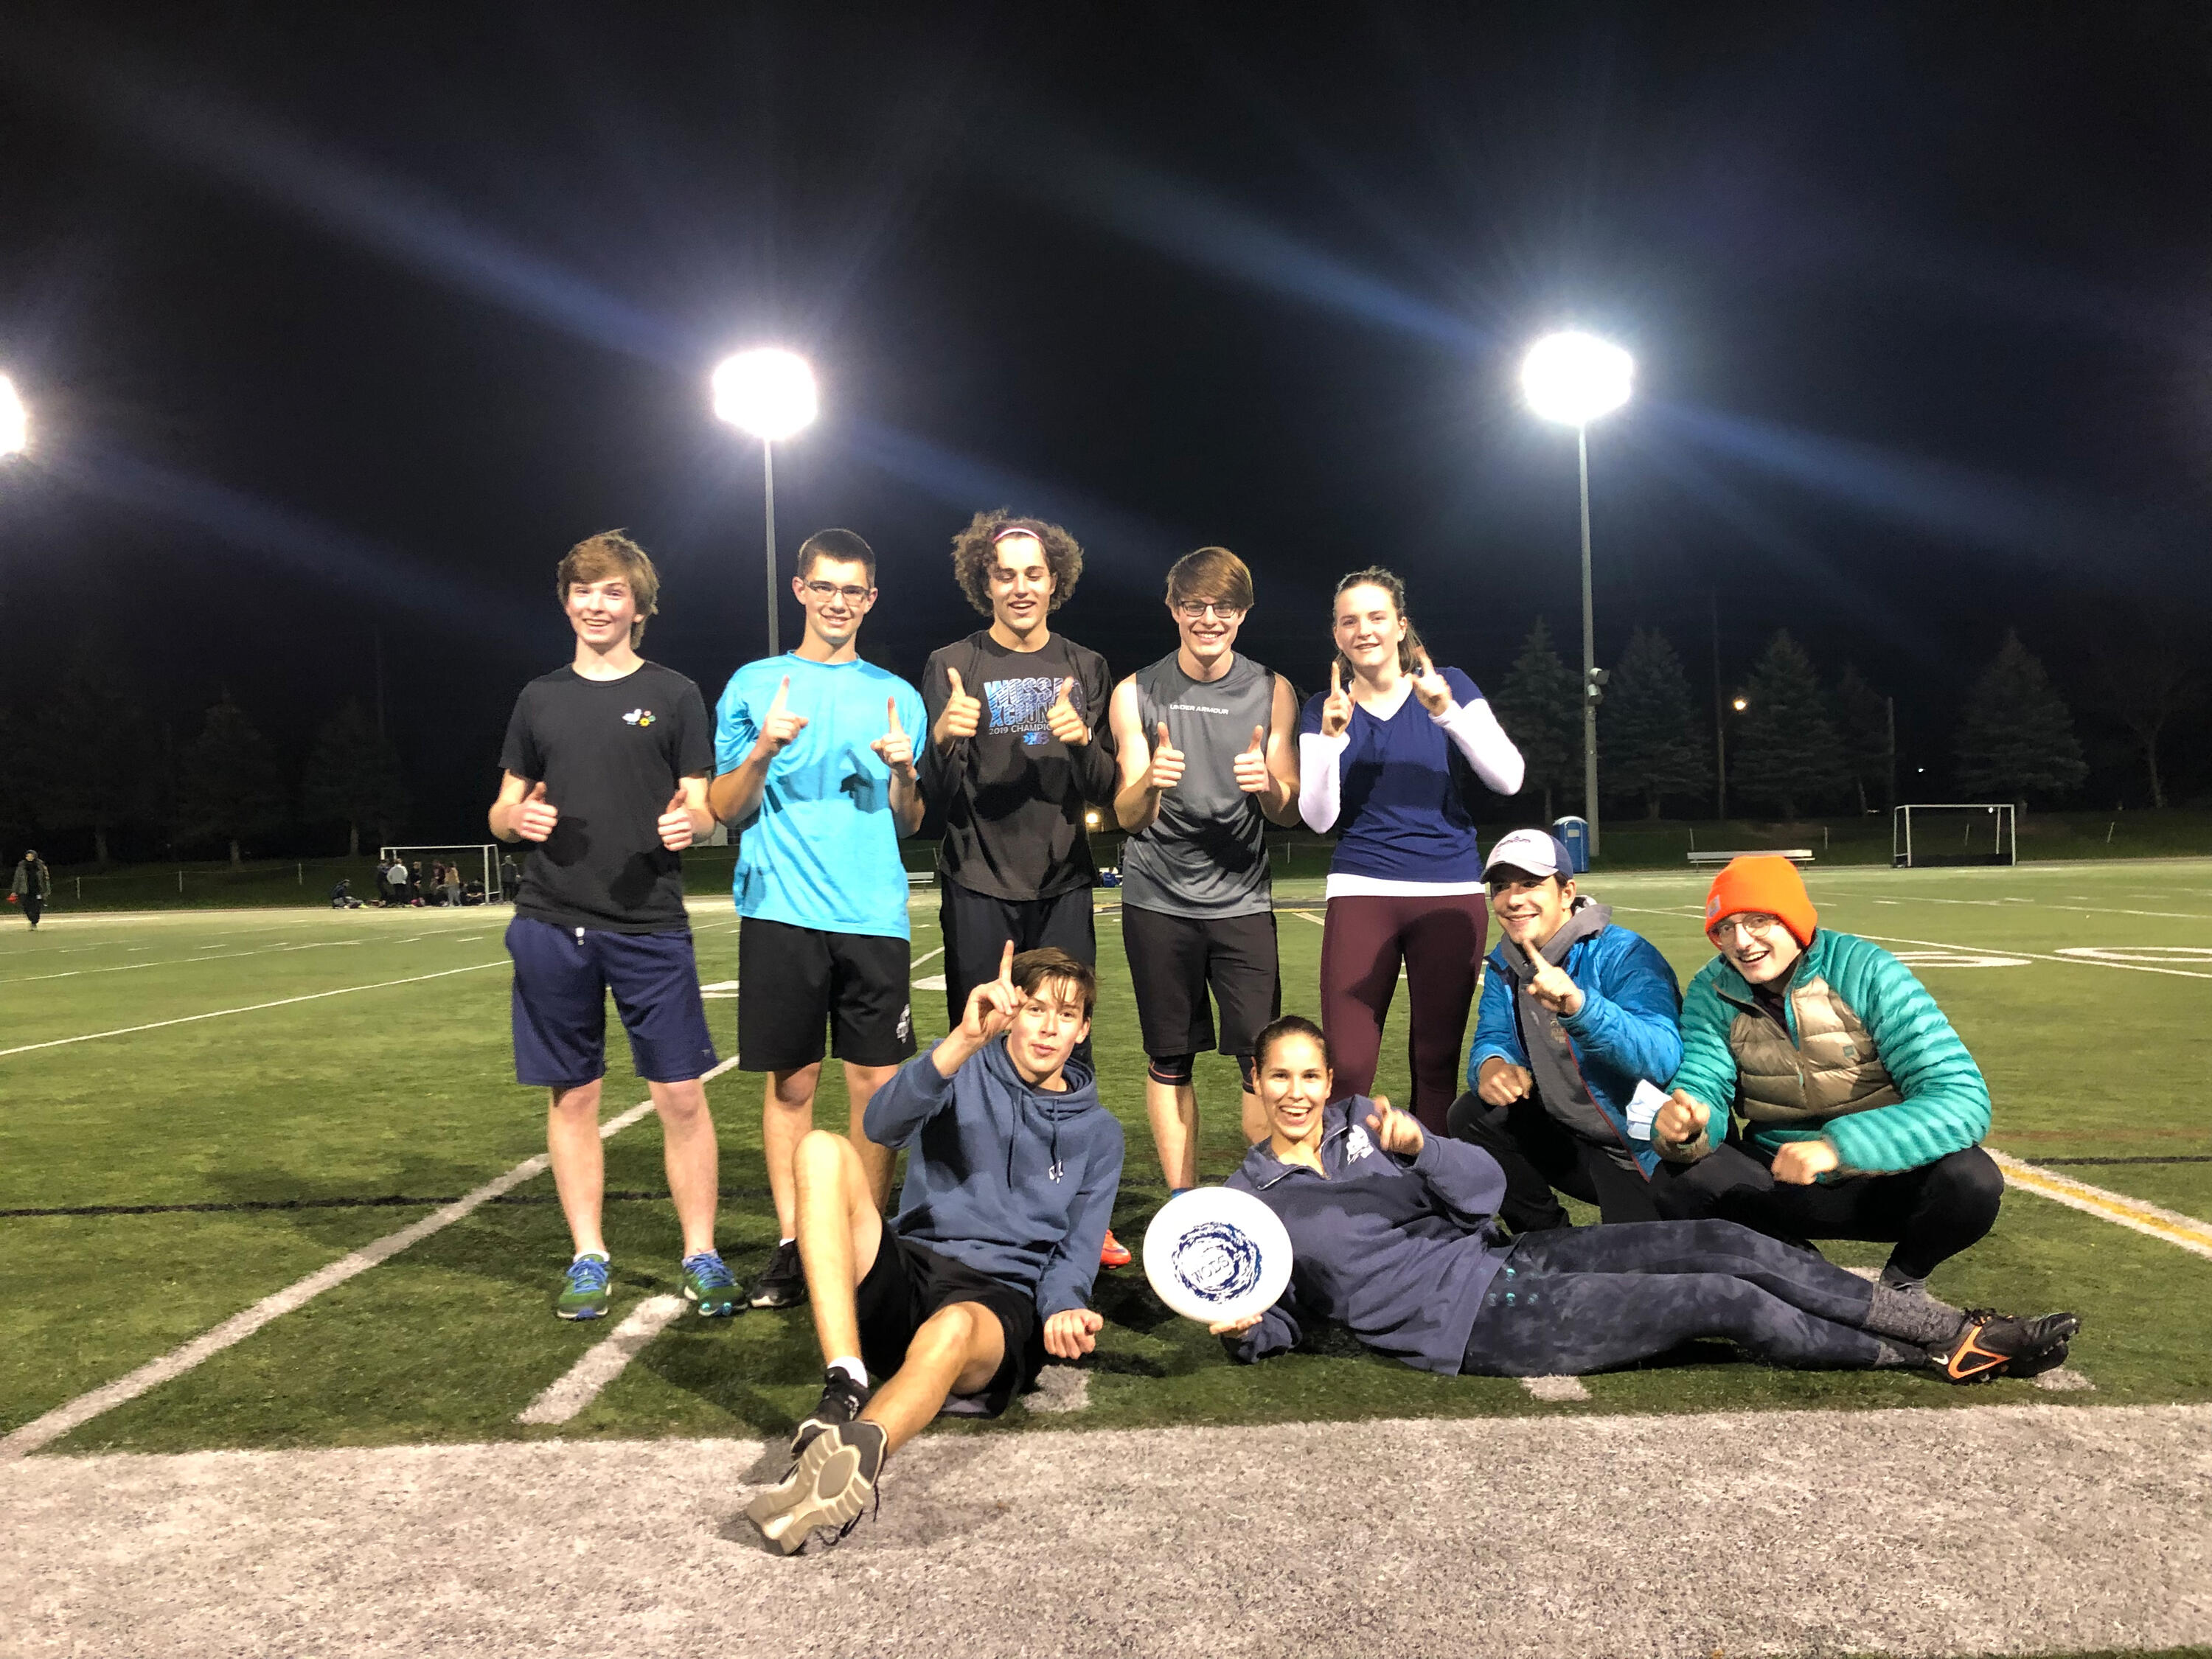 Student ultimate team group photo